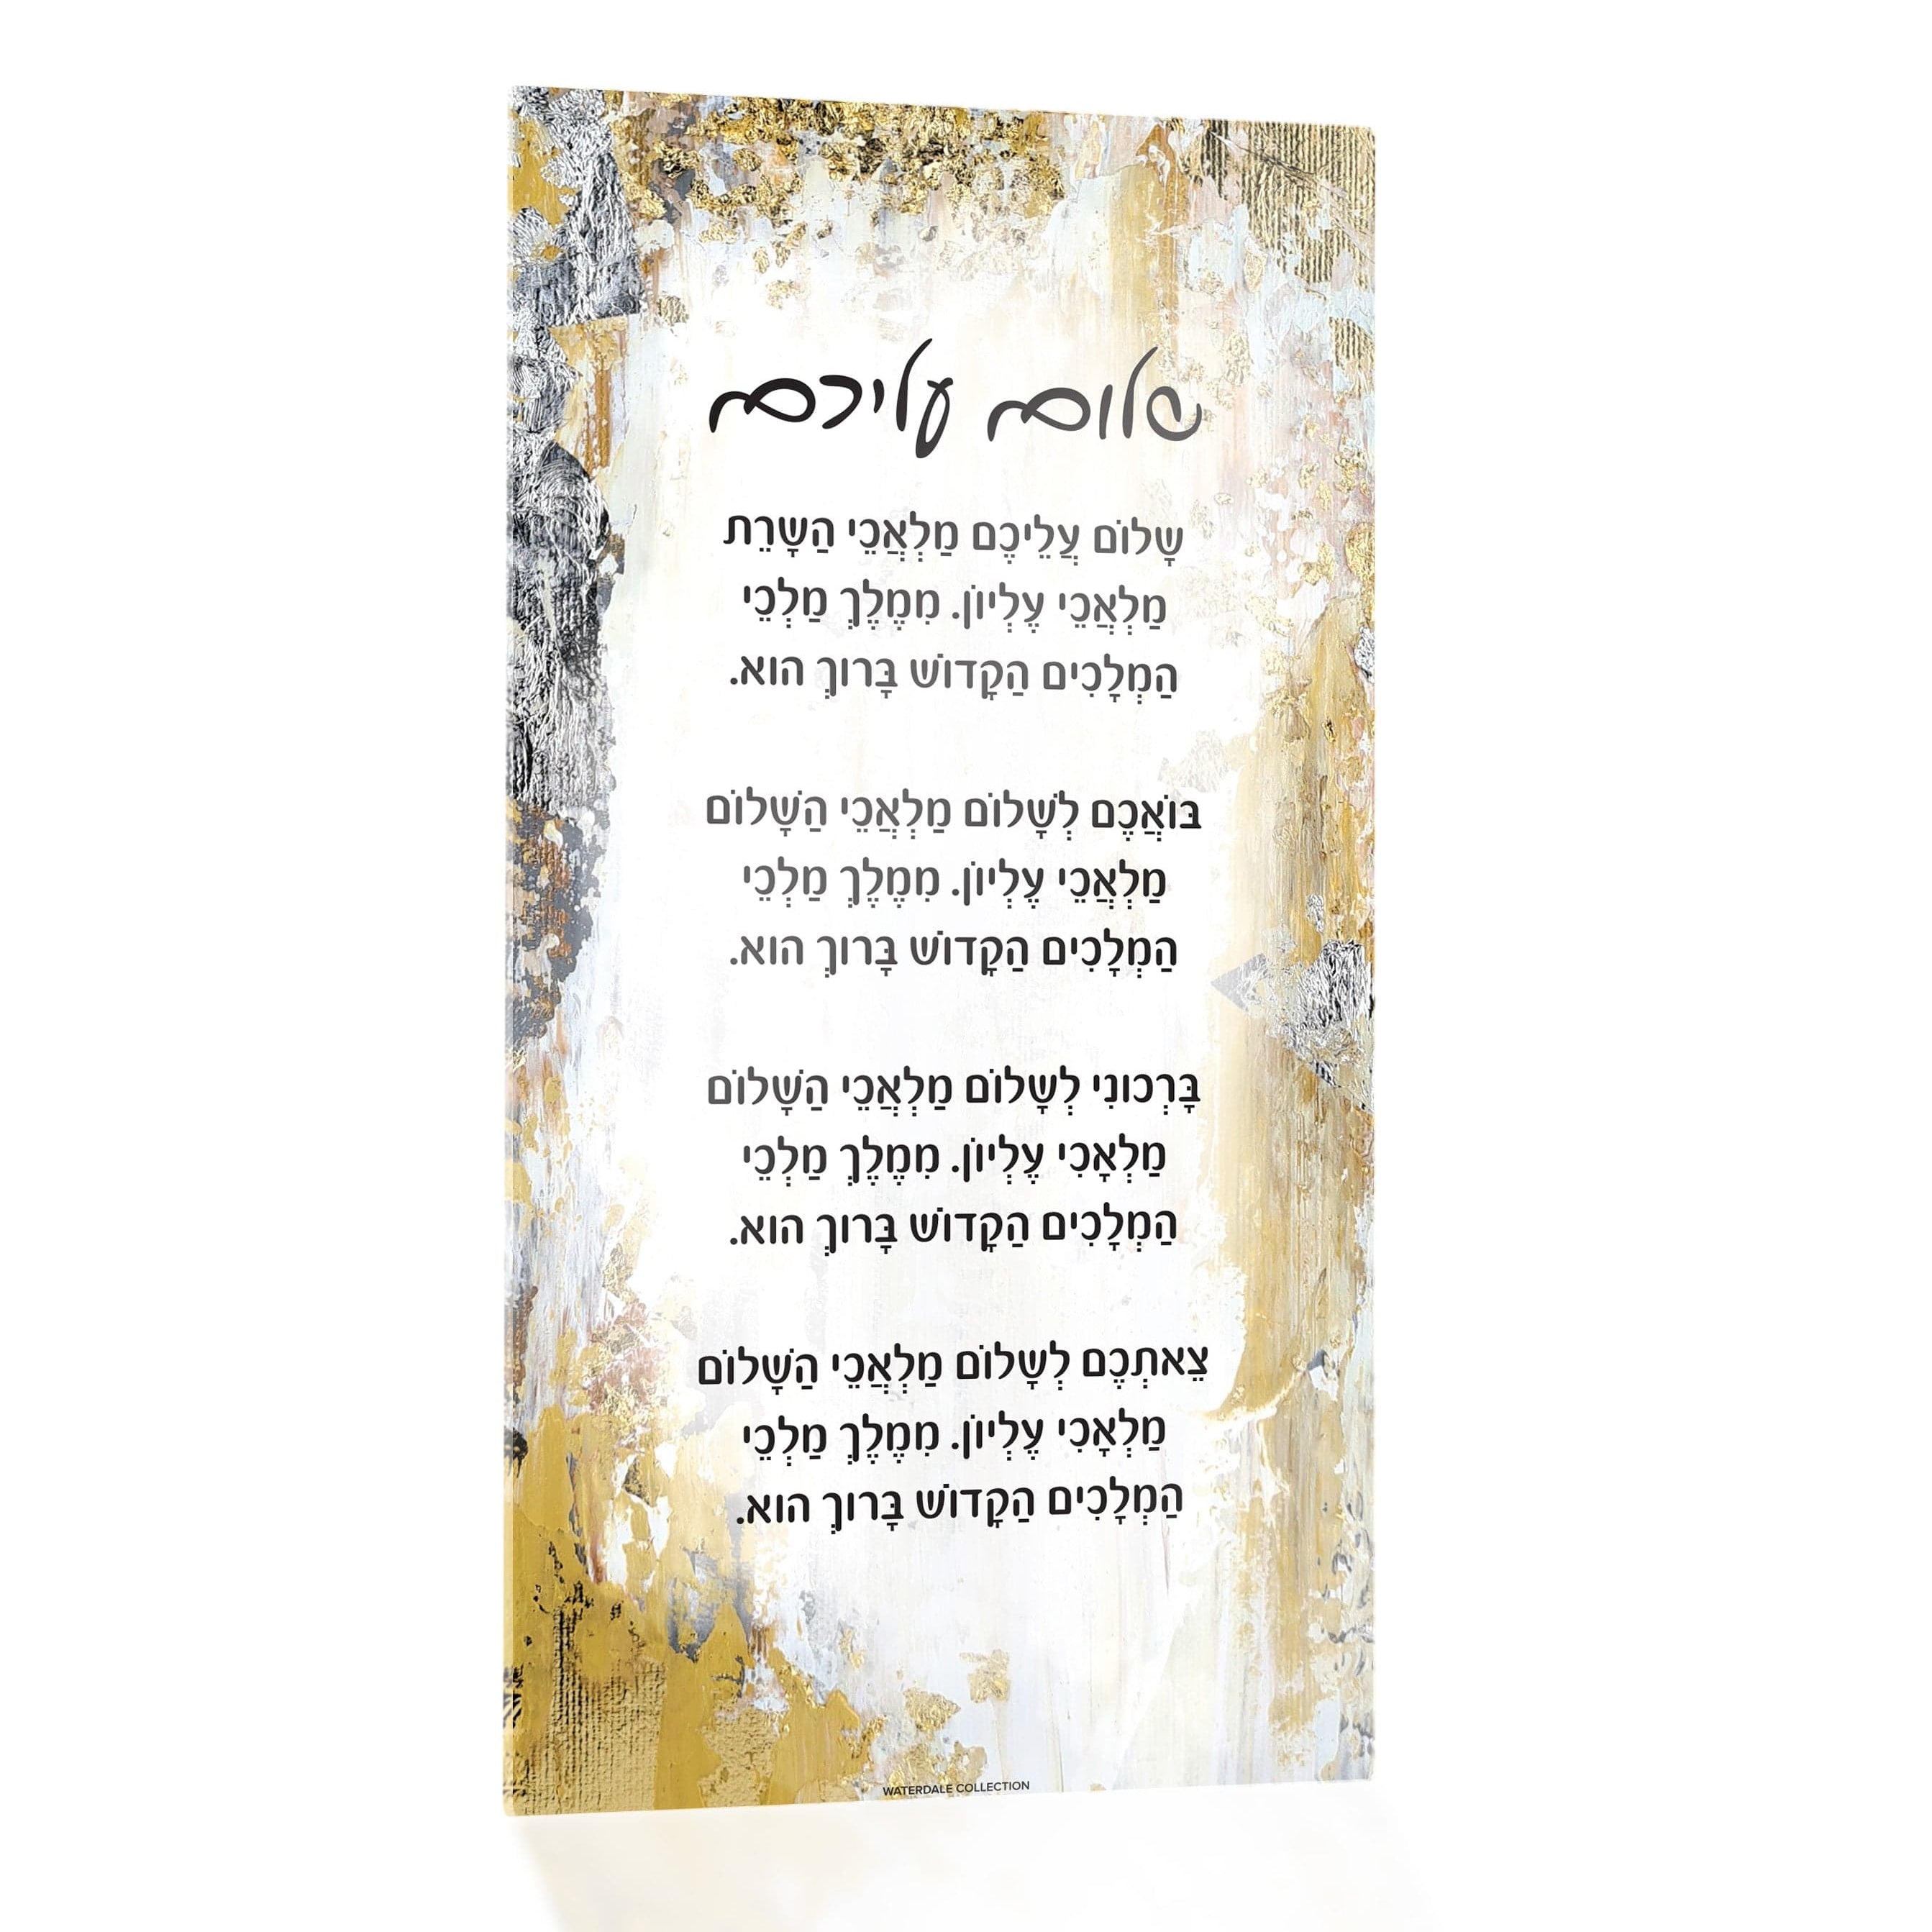 Painted Shalom Aleichem / Eishes Chayil Card - Waterdale Collection